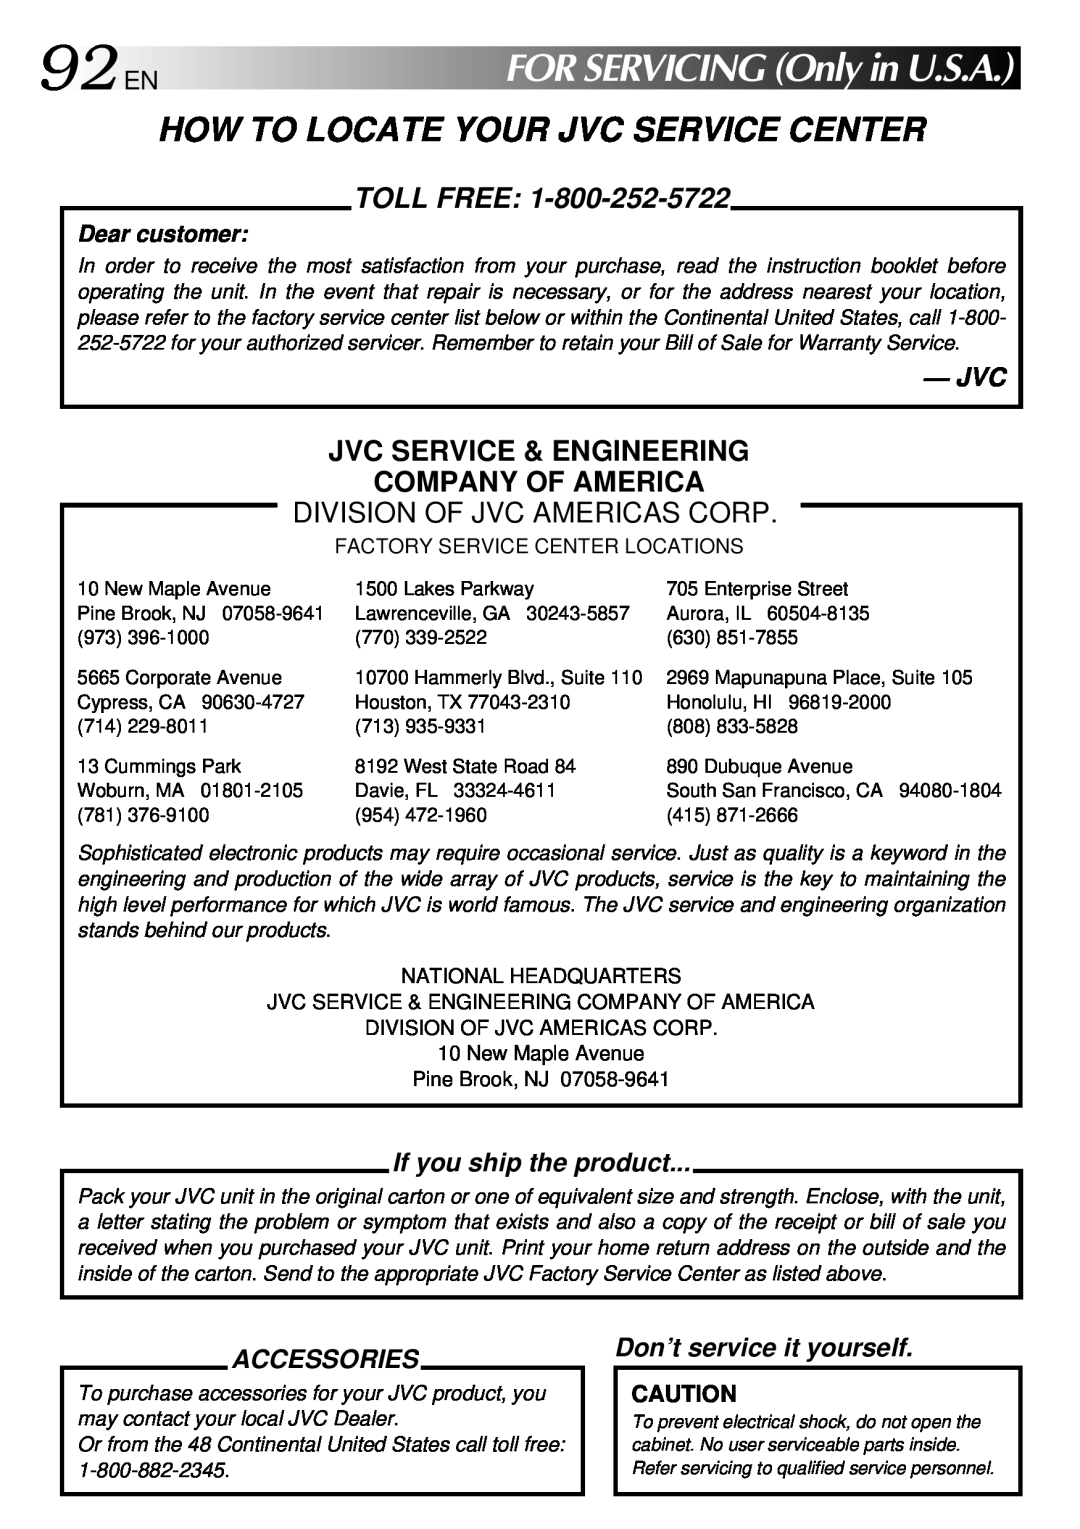 JVC GC-QX3 92ENFORSERVICINGOnlyinU.S.A, Jvc Service & Engineering Company Of America, If you ship the product, Accessories 